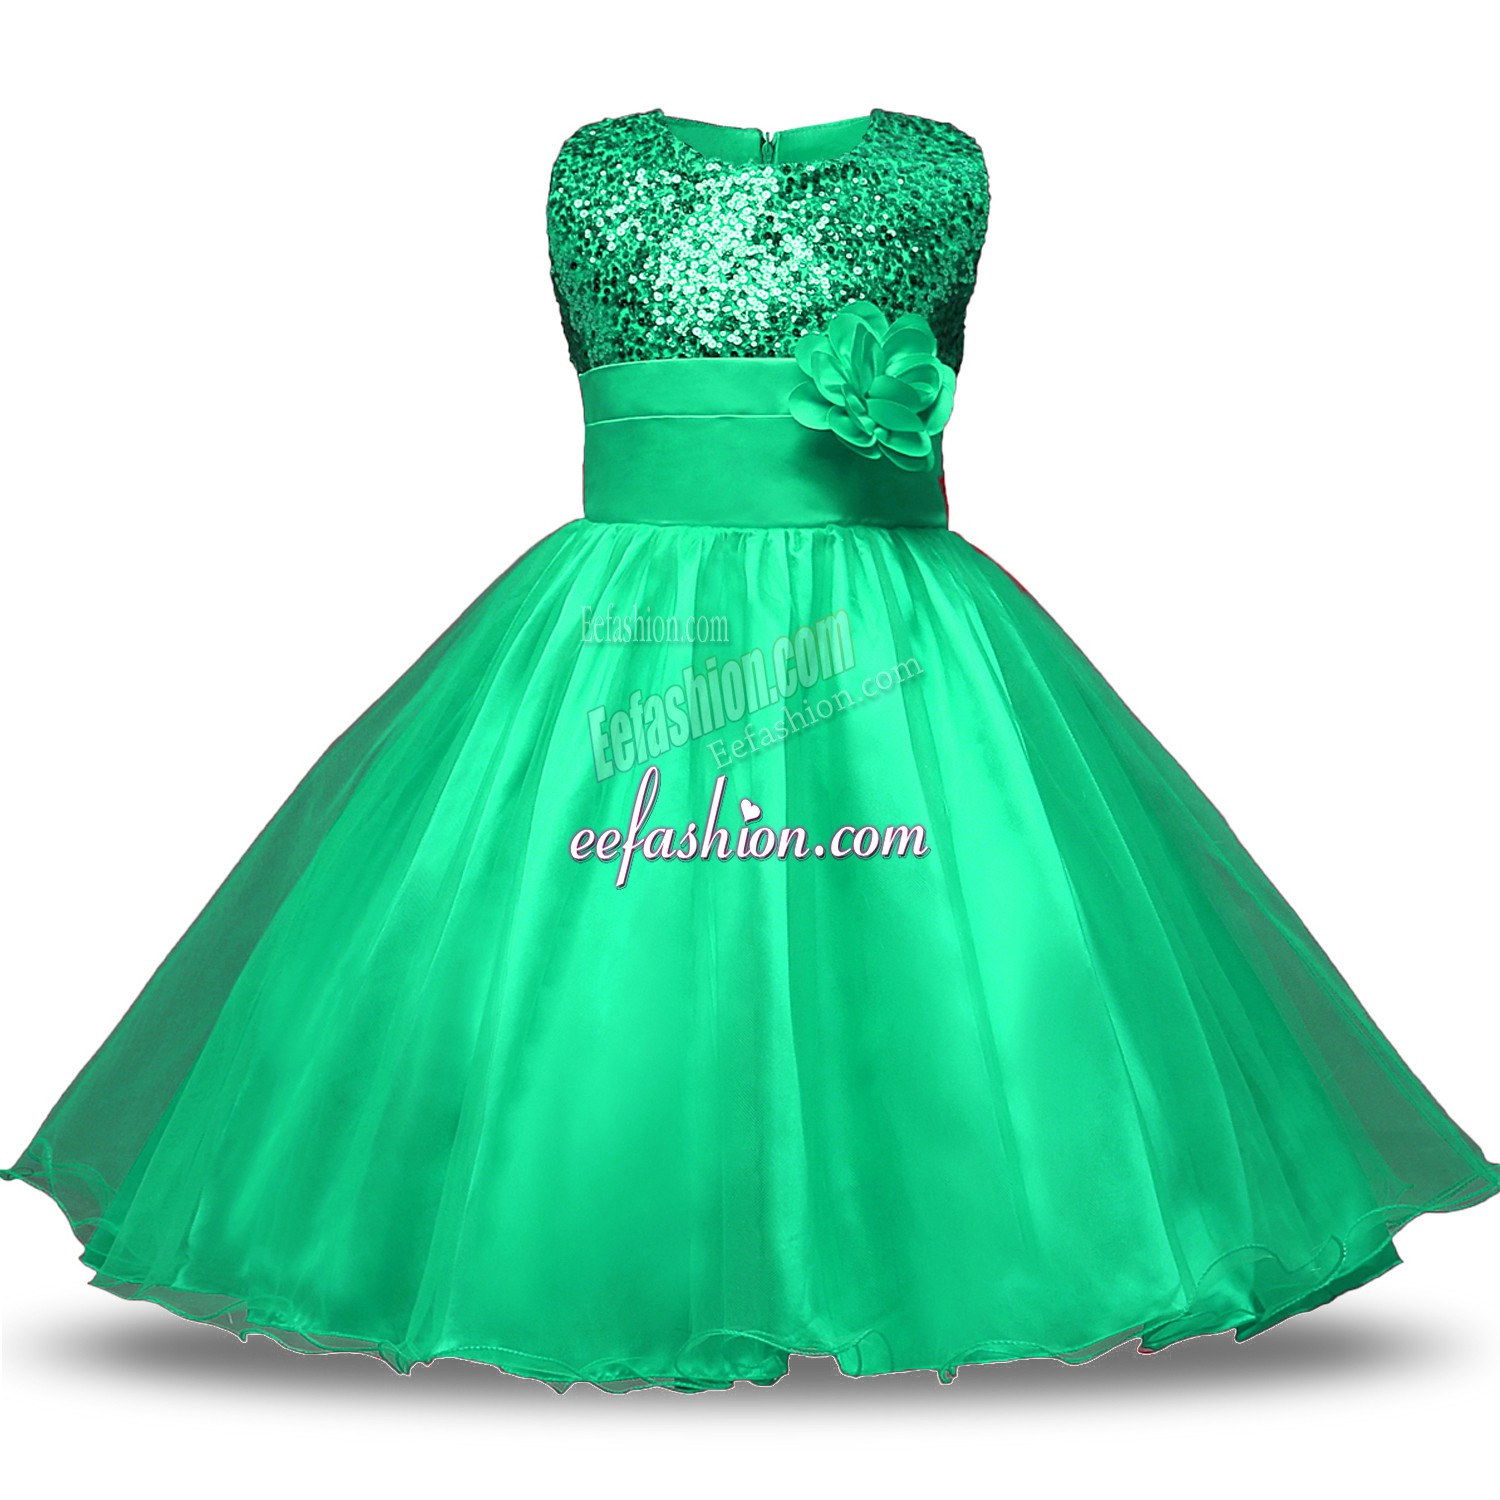 Enchanting Turquoise Ball Gowns Scoop Sleeveless Organza and Sequined Knee Length Zipper Belt and Hand Made Flower Toddler Flower Girl Dress